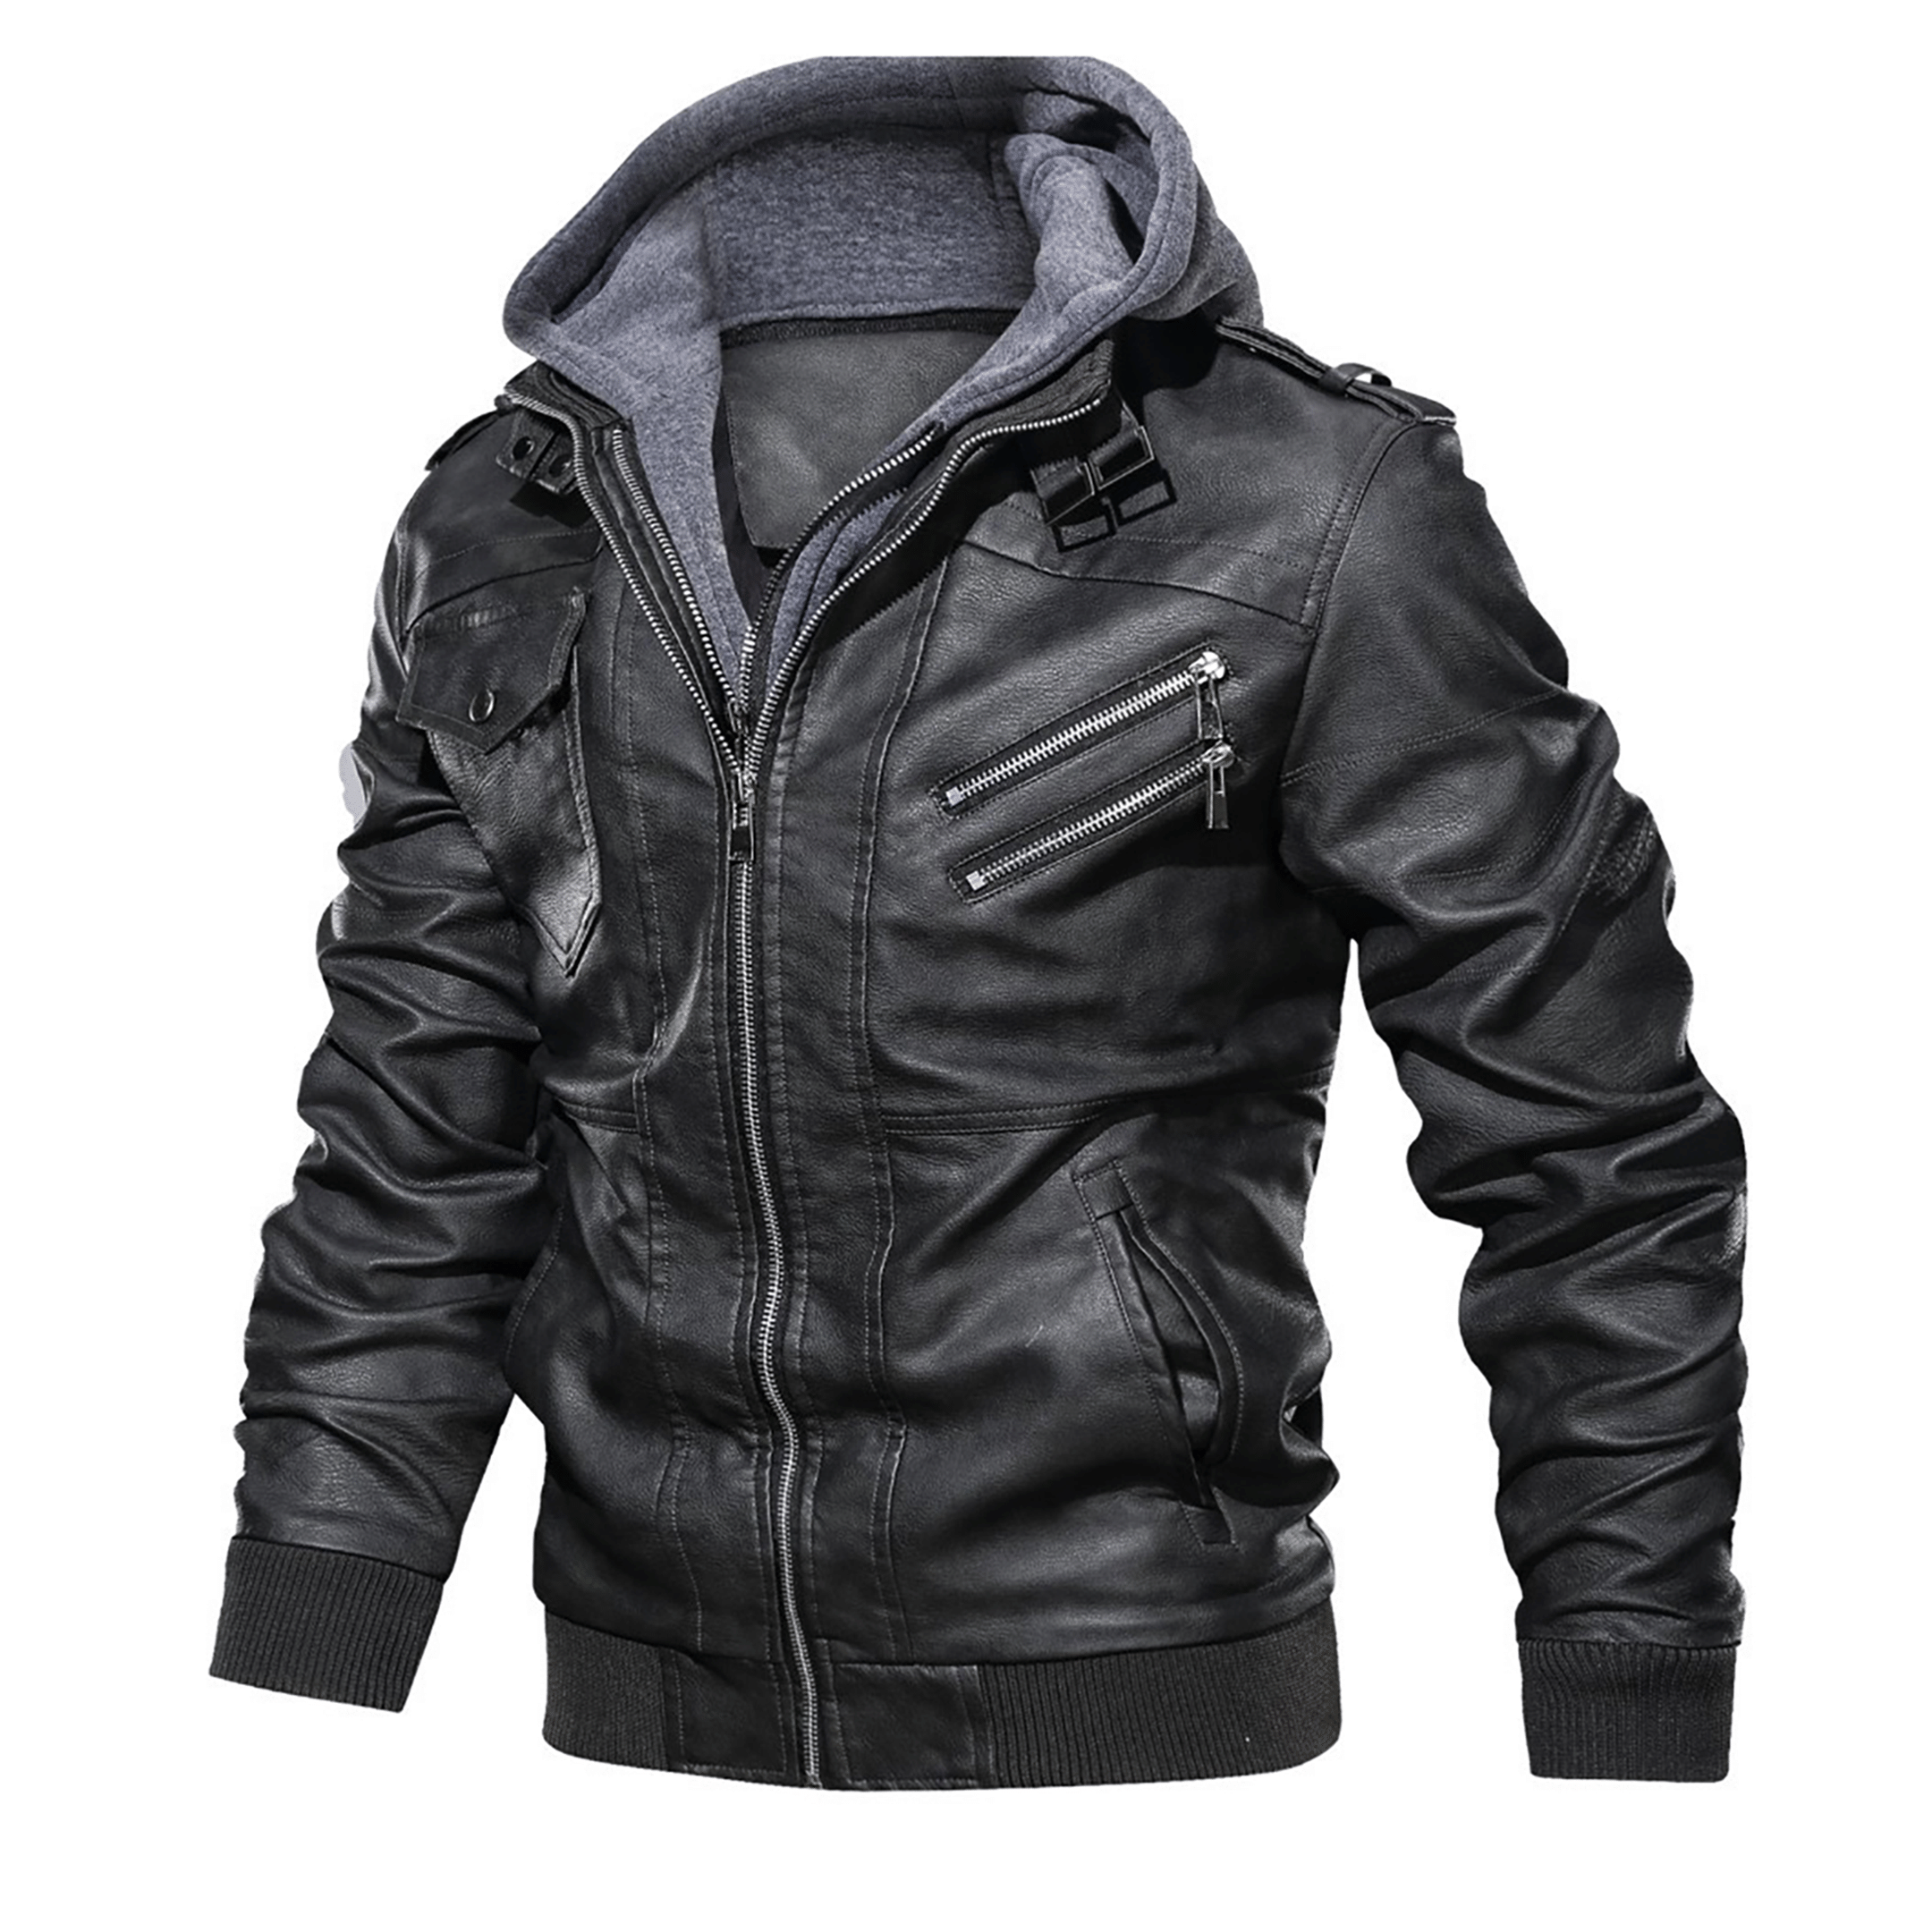 Top leather jackets and latest products 367